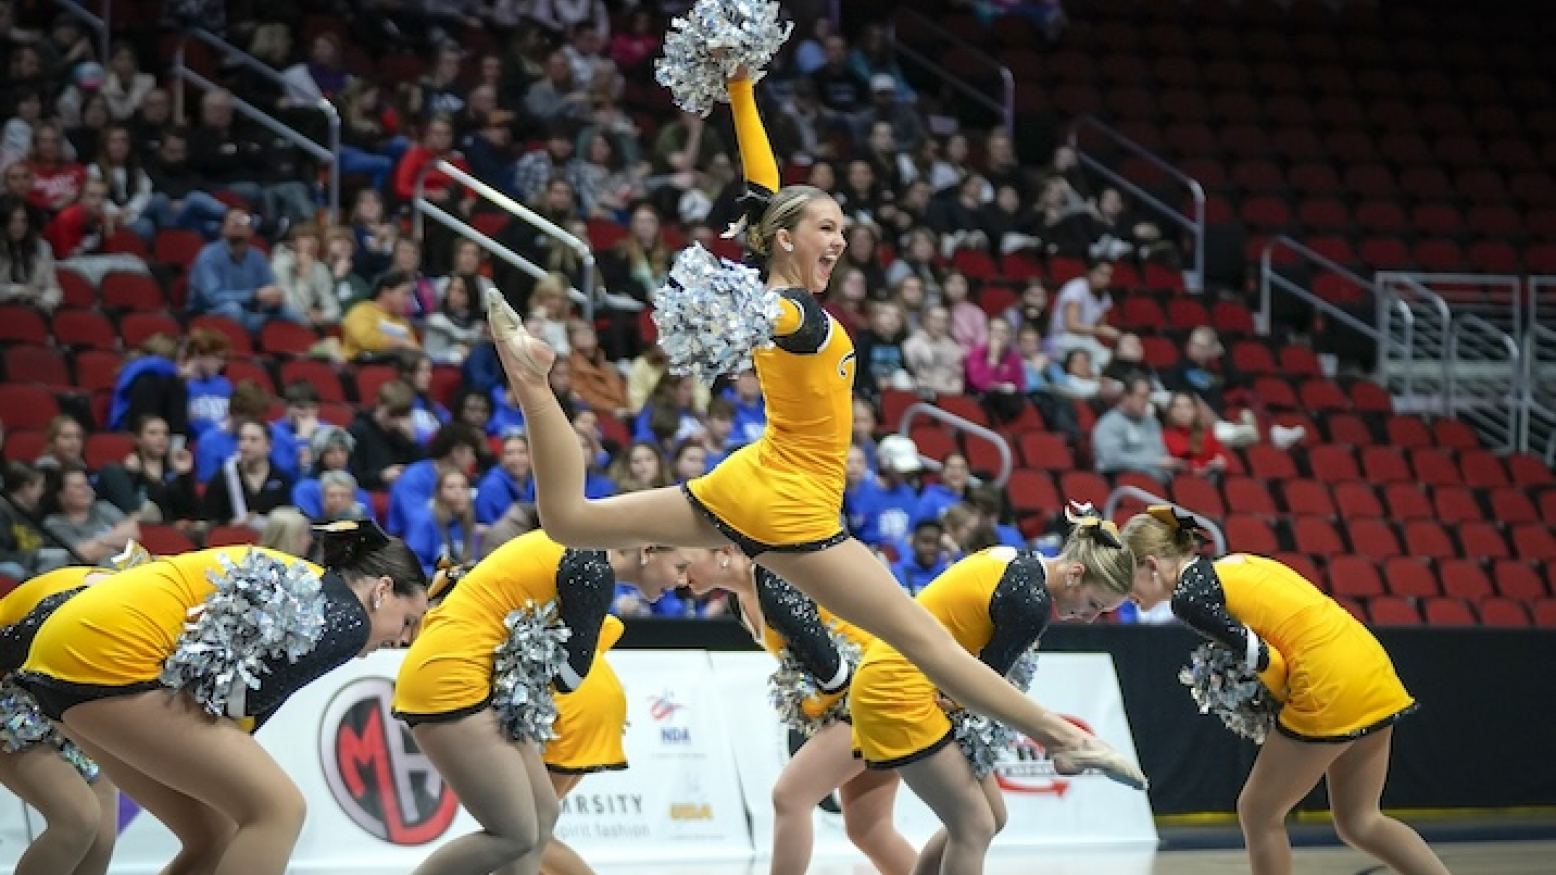 Female dancers performing in yellow uniforms with silver pom poms. The dancer in the center foreground is leaping in the air with her arms raised.